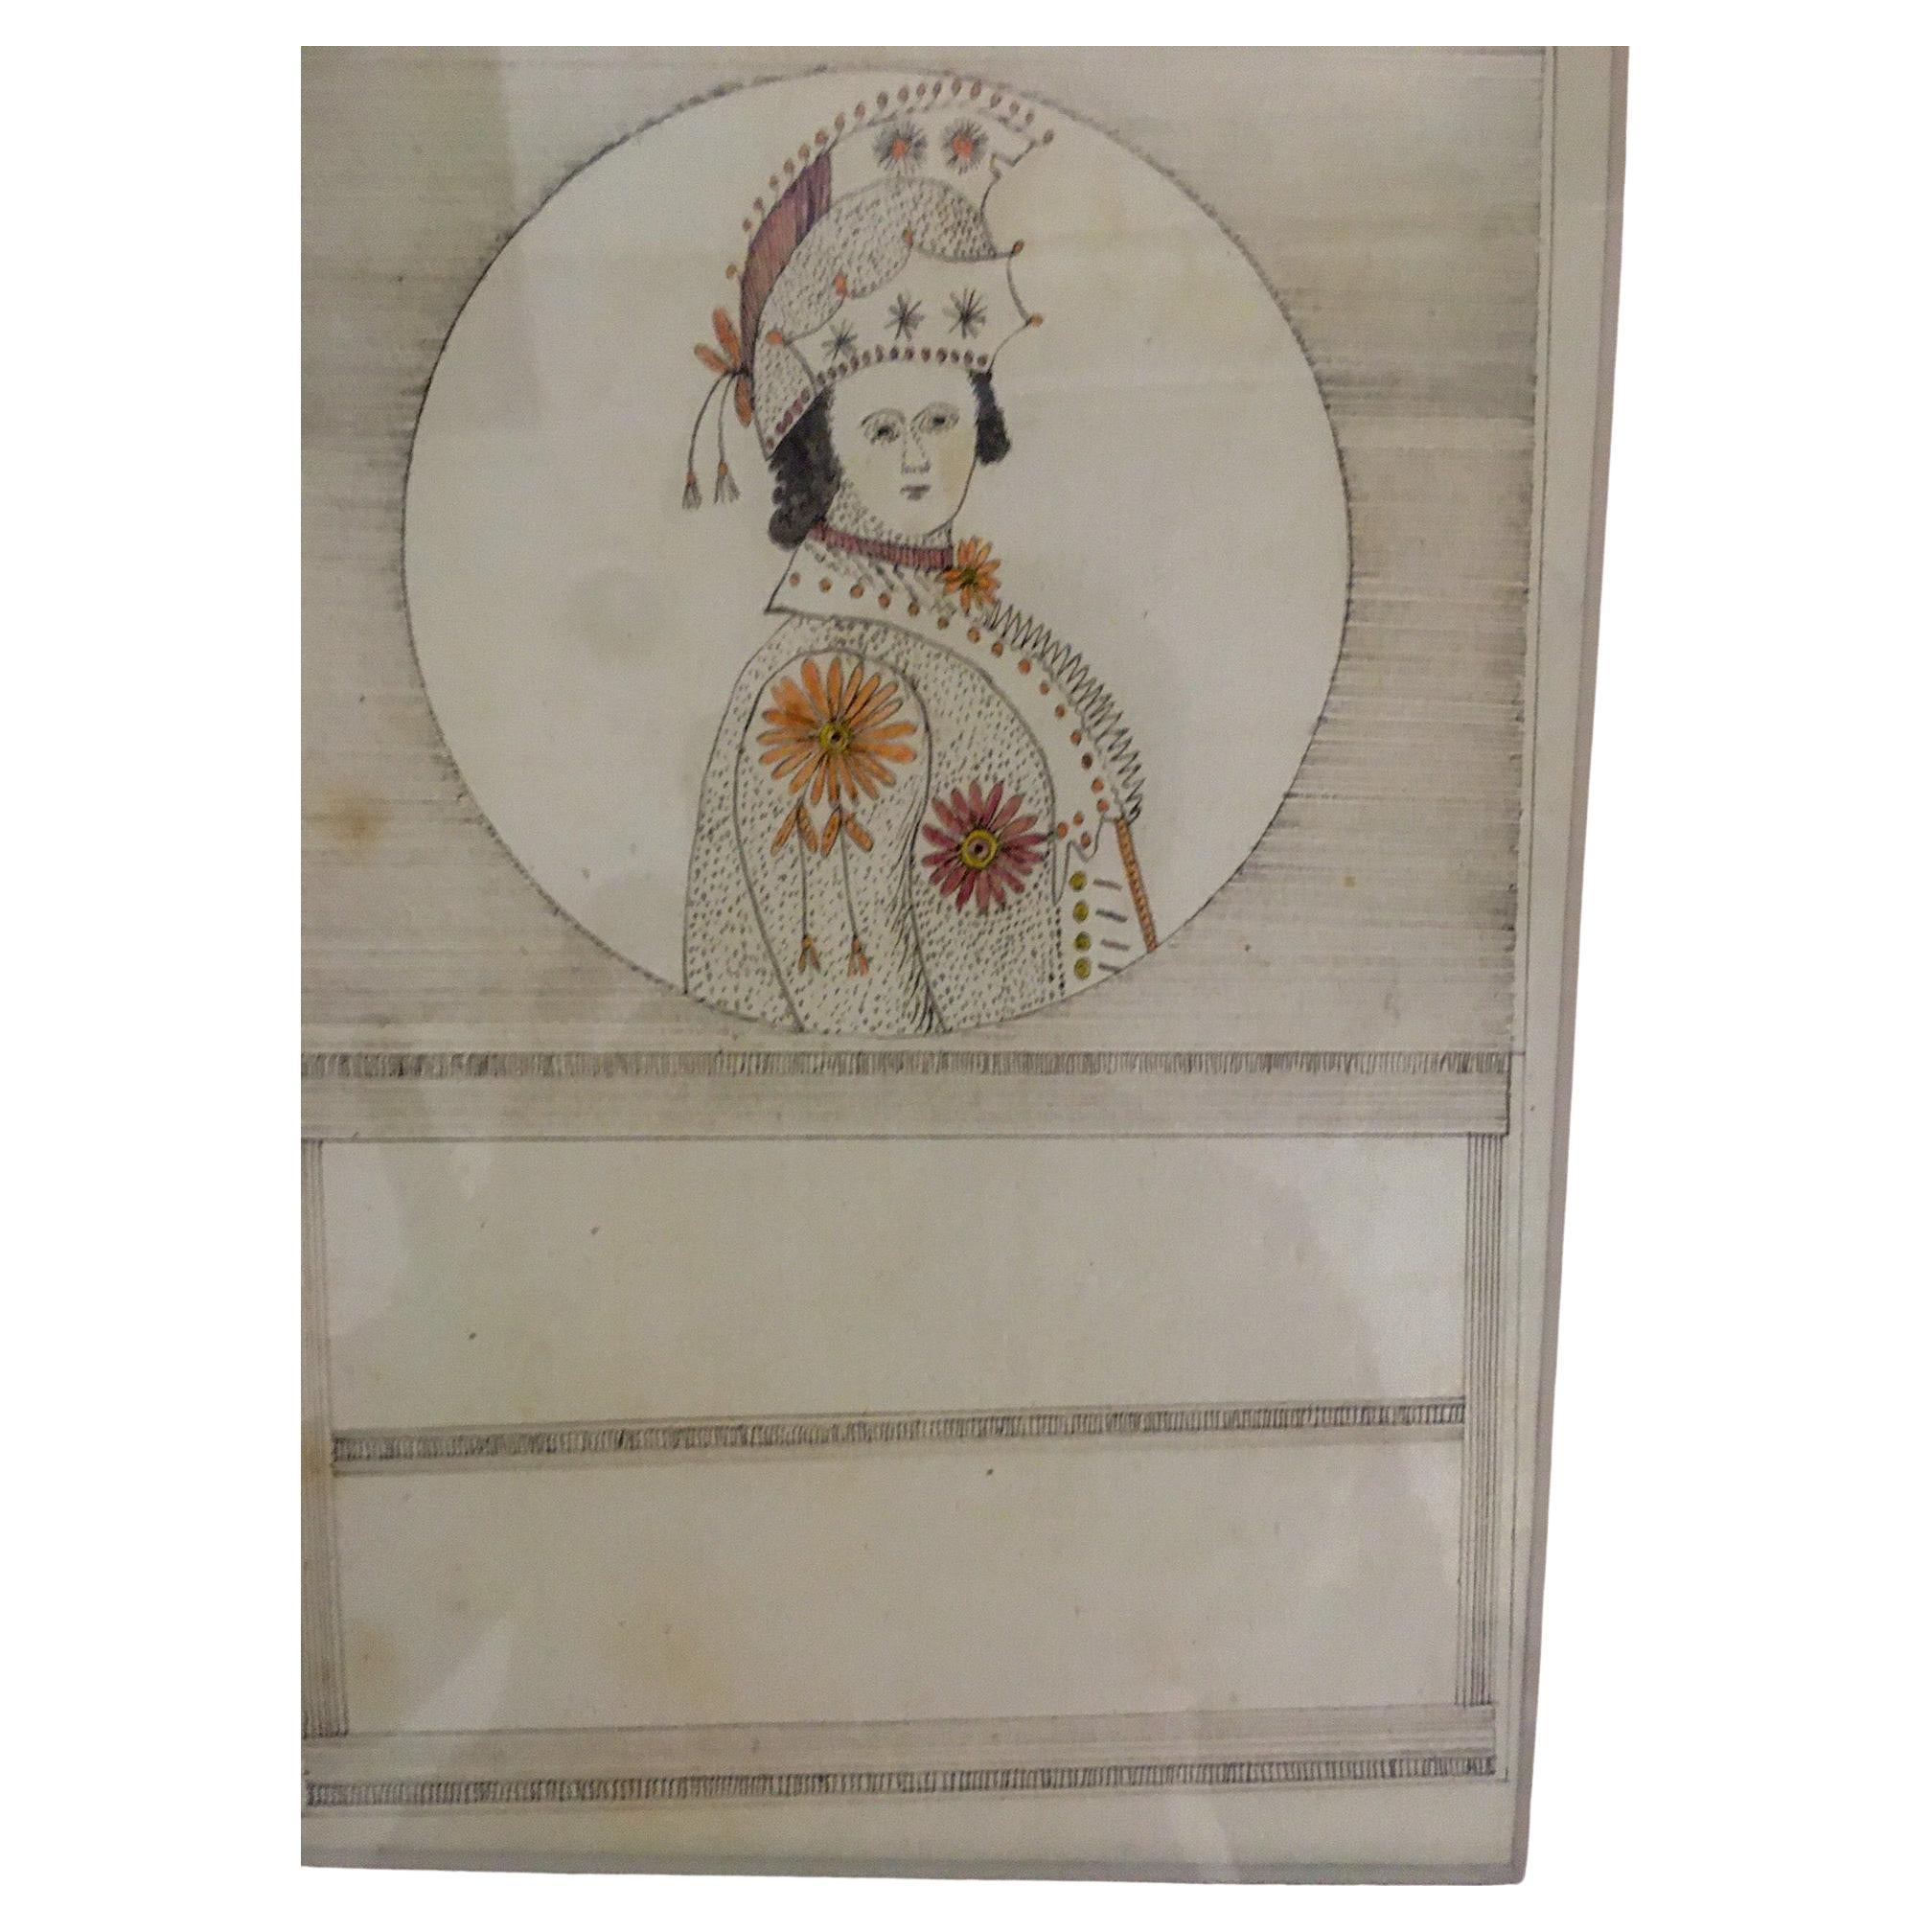 This unusual set of drawings in a double sided frame came out of an old New England Estate in a Beacon Hill, Boston home. From what we have gathered, they are hand-colored drawings of some sort of dignitary drawn on one side and a perspective